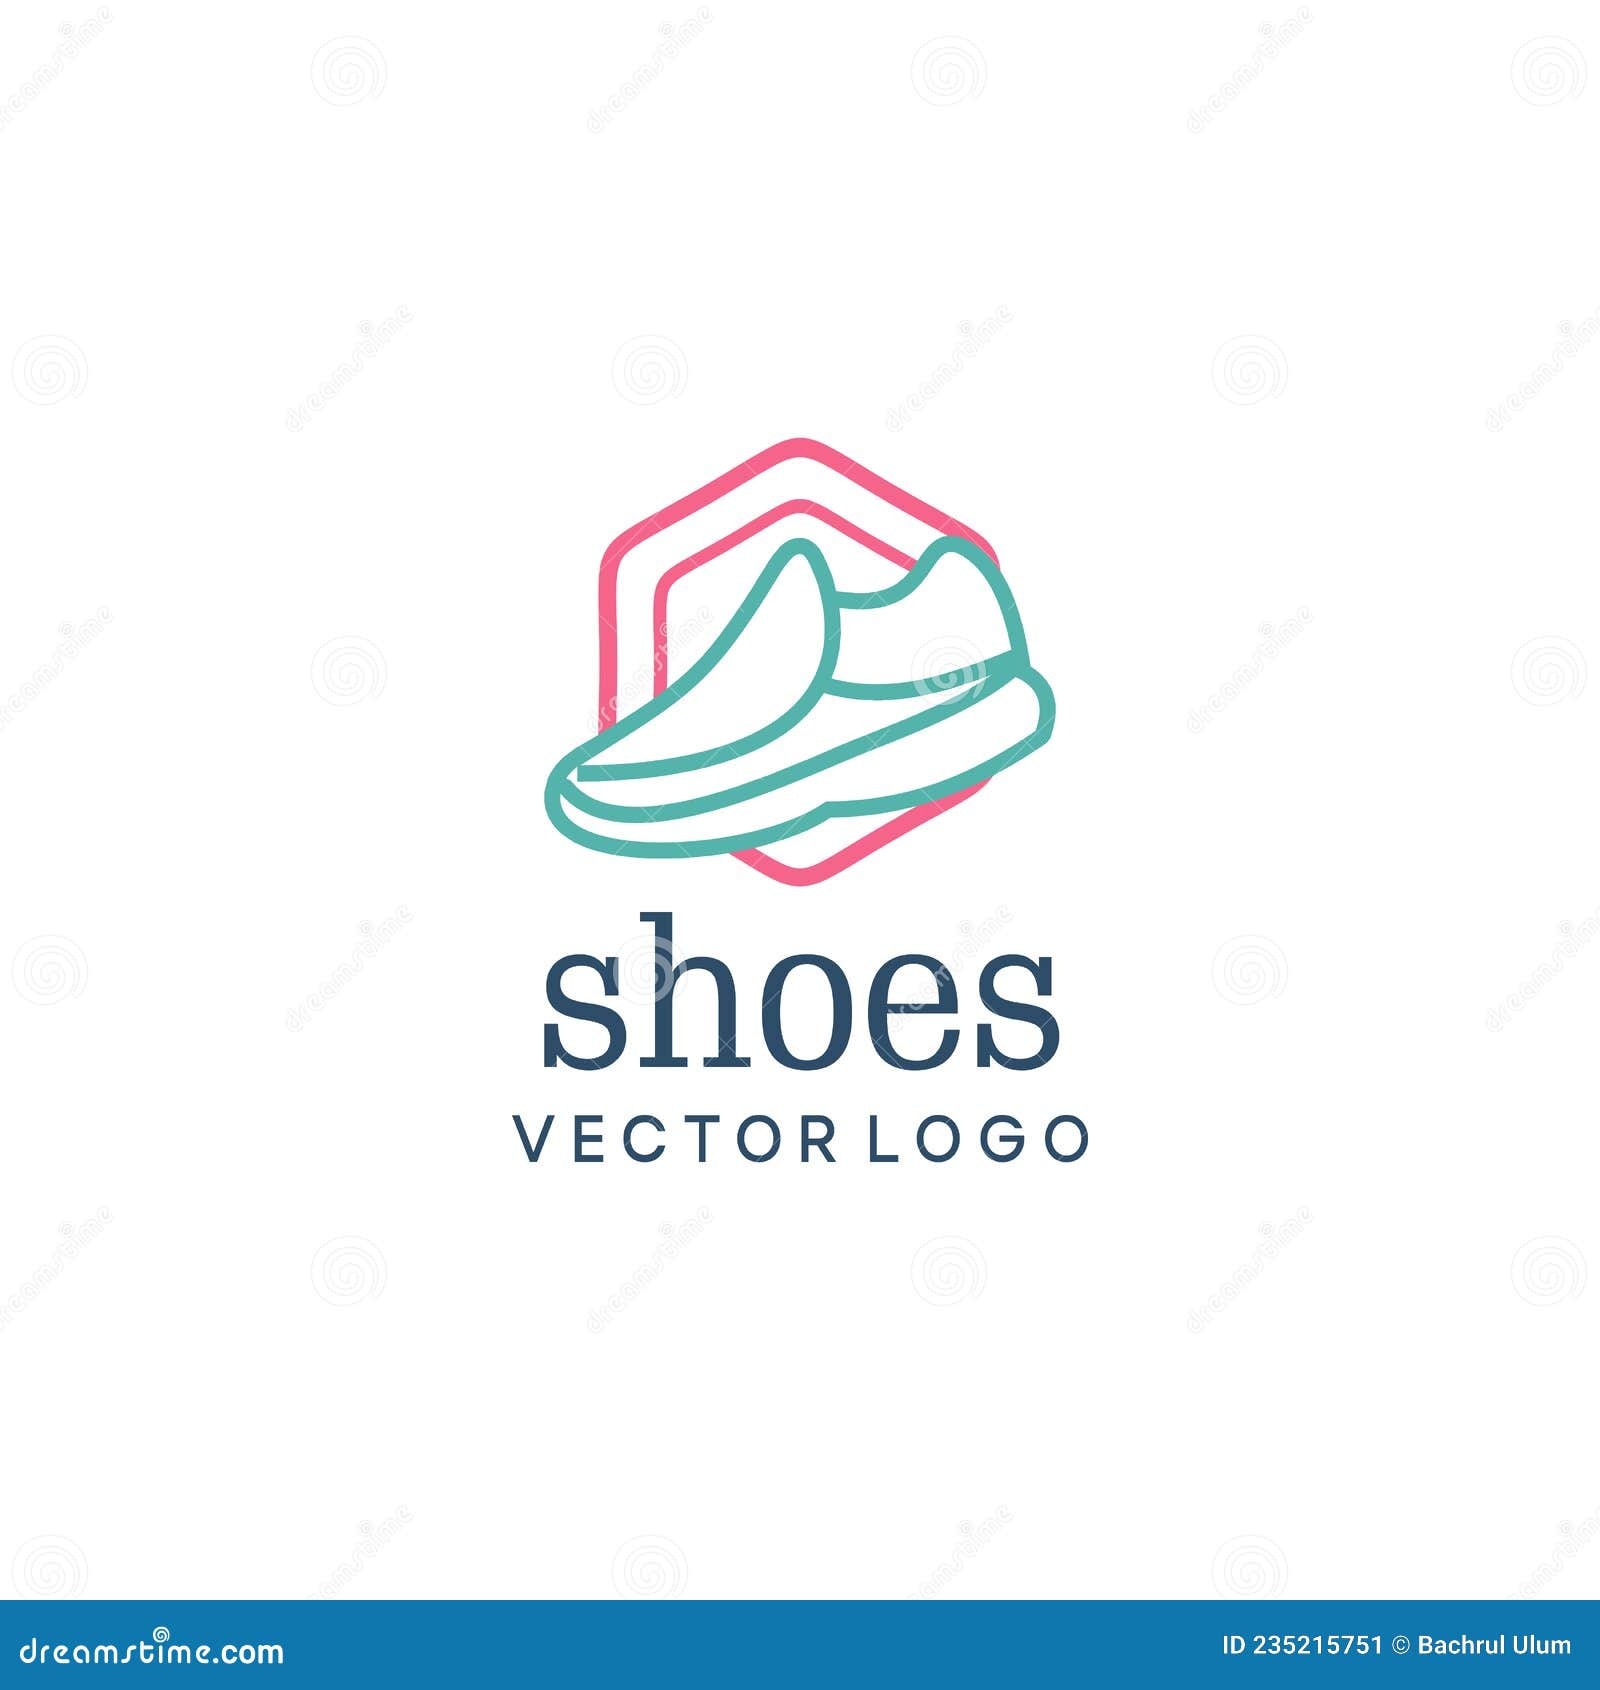 Illustration Vector Graphic of Shoes Logo. Shoe Icon. Pastel Color ...